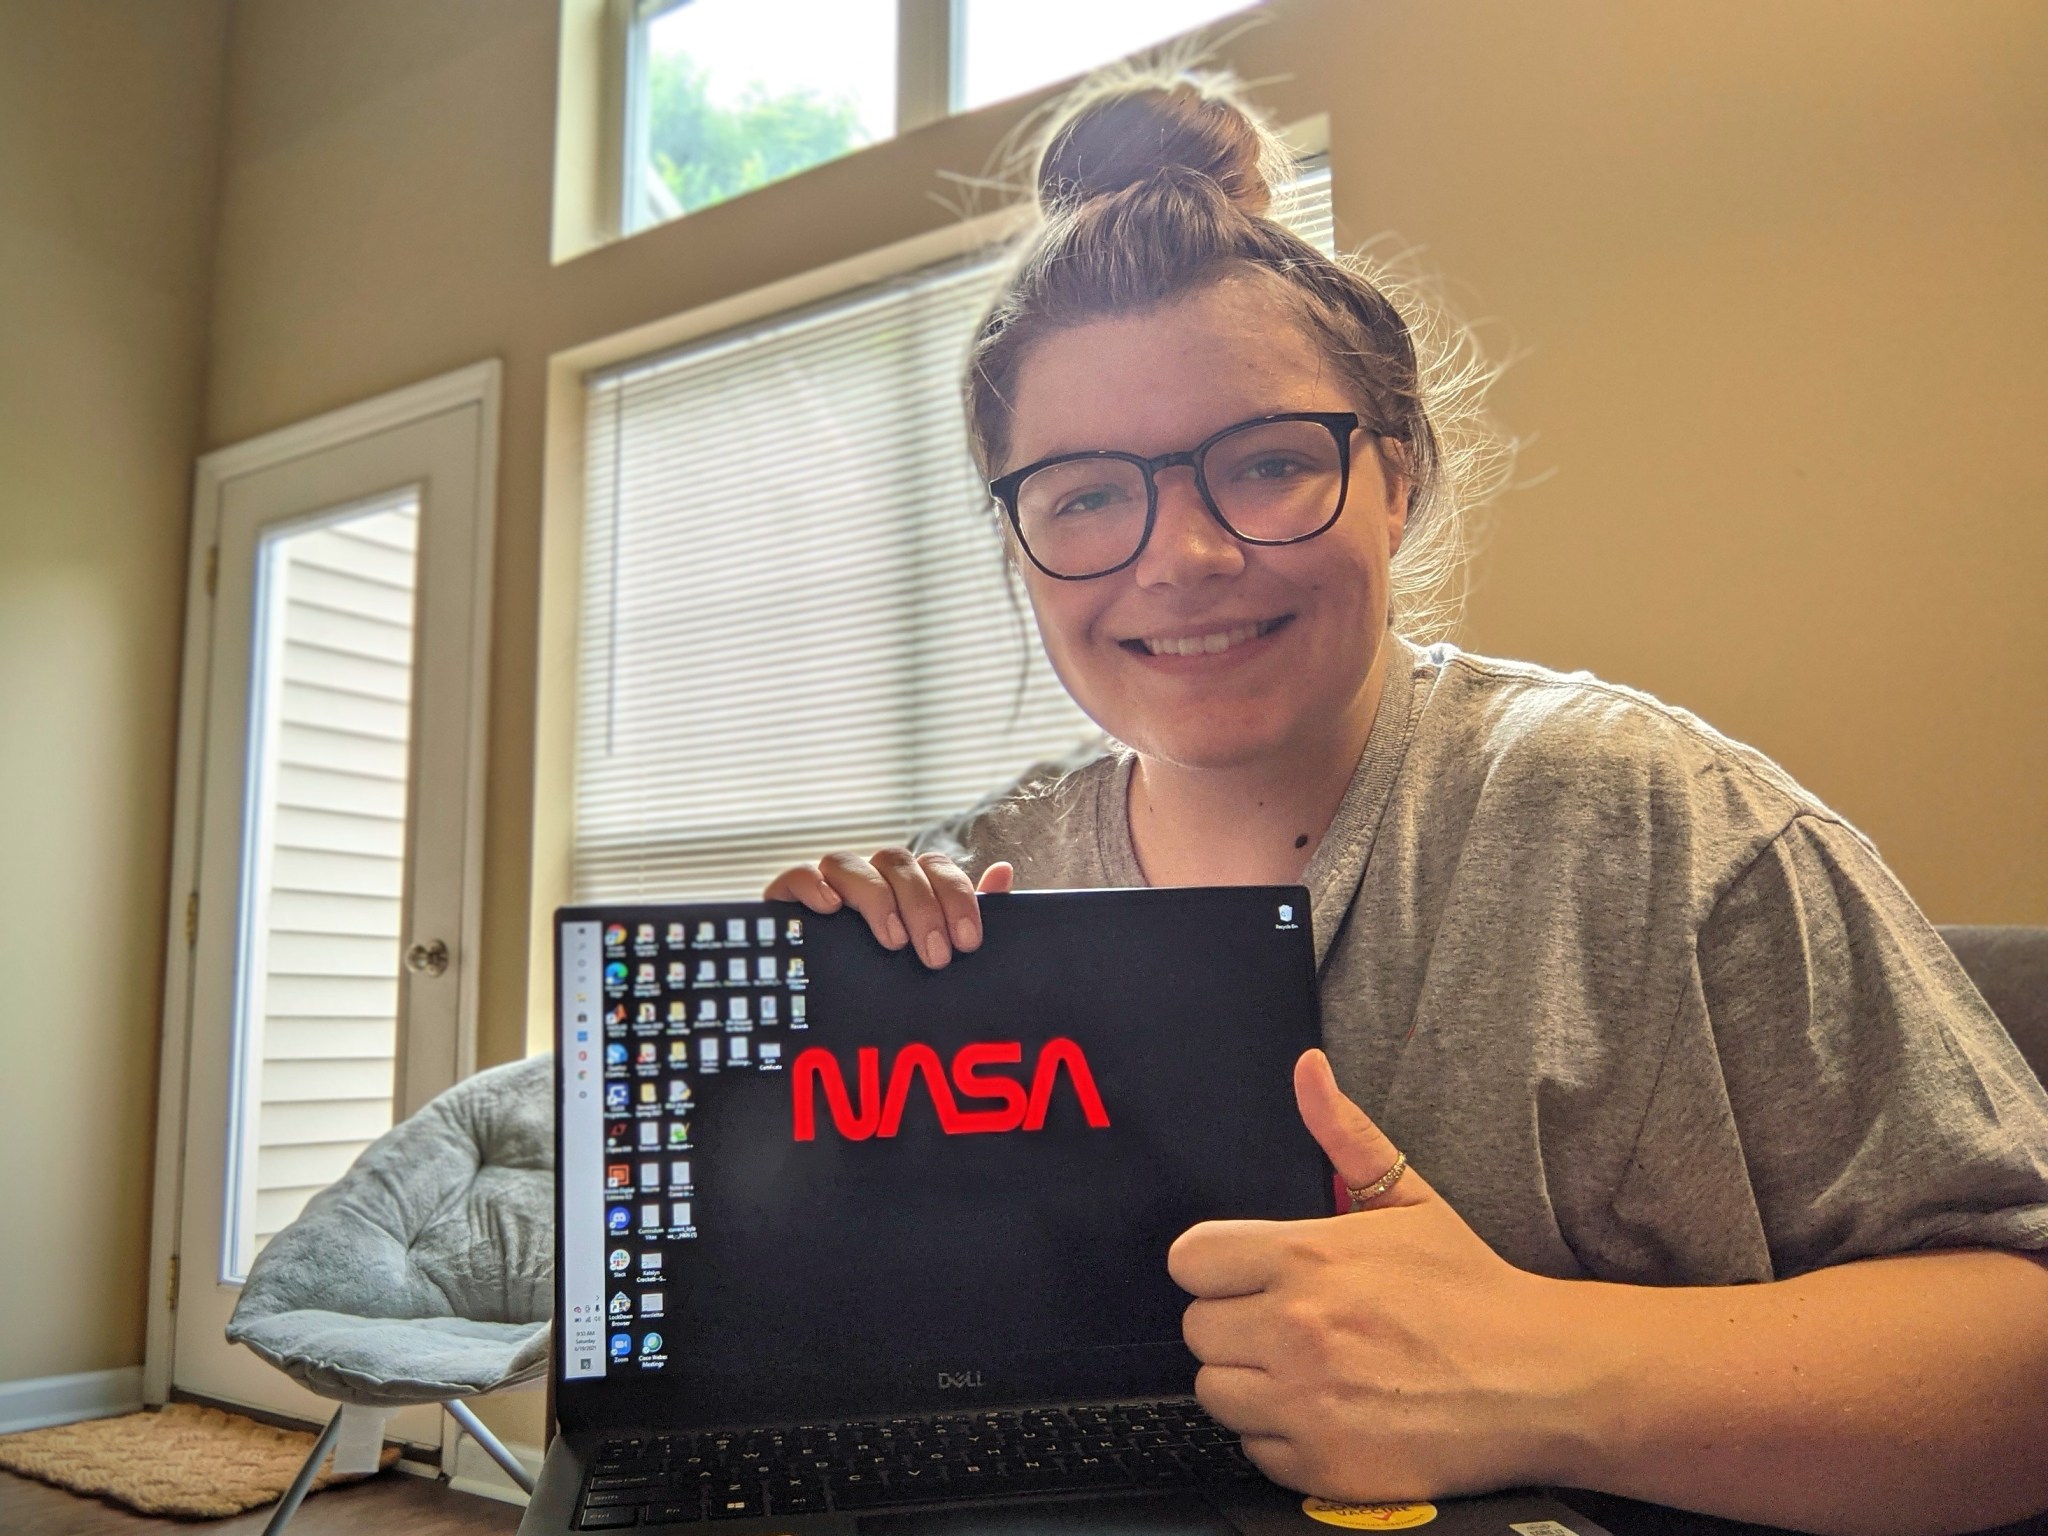 “For me, it’s always been about using my abilities to do something bigger than myself that could benefit people all over the world, and NASA’s mission embodies that more than any other entity out there,” said intern Katelyn Crockett.